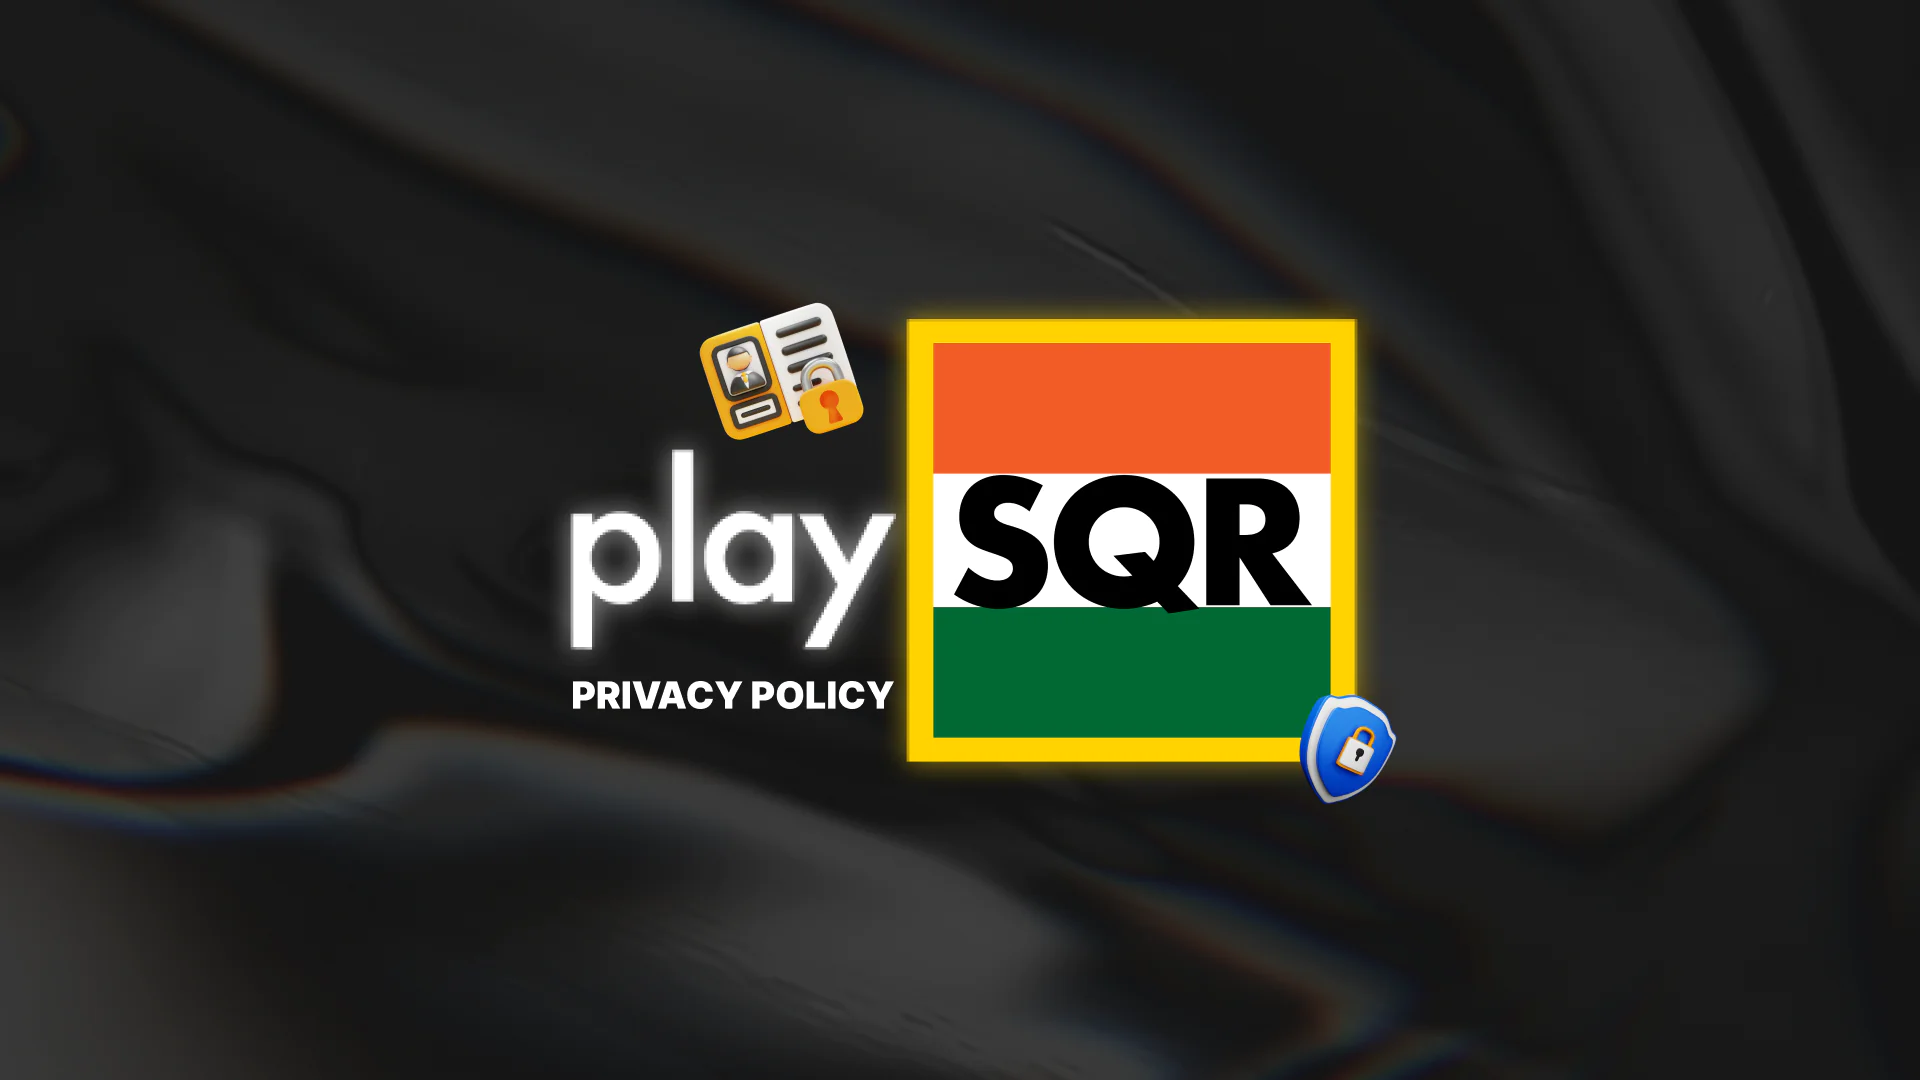 Learn more Information about Privacy Policy in PlaySQR